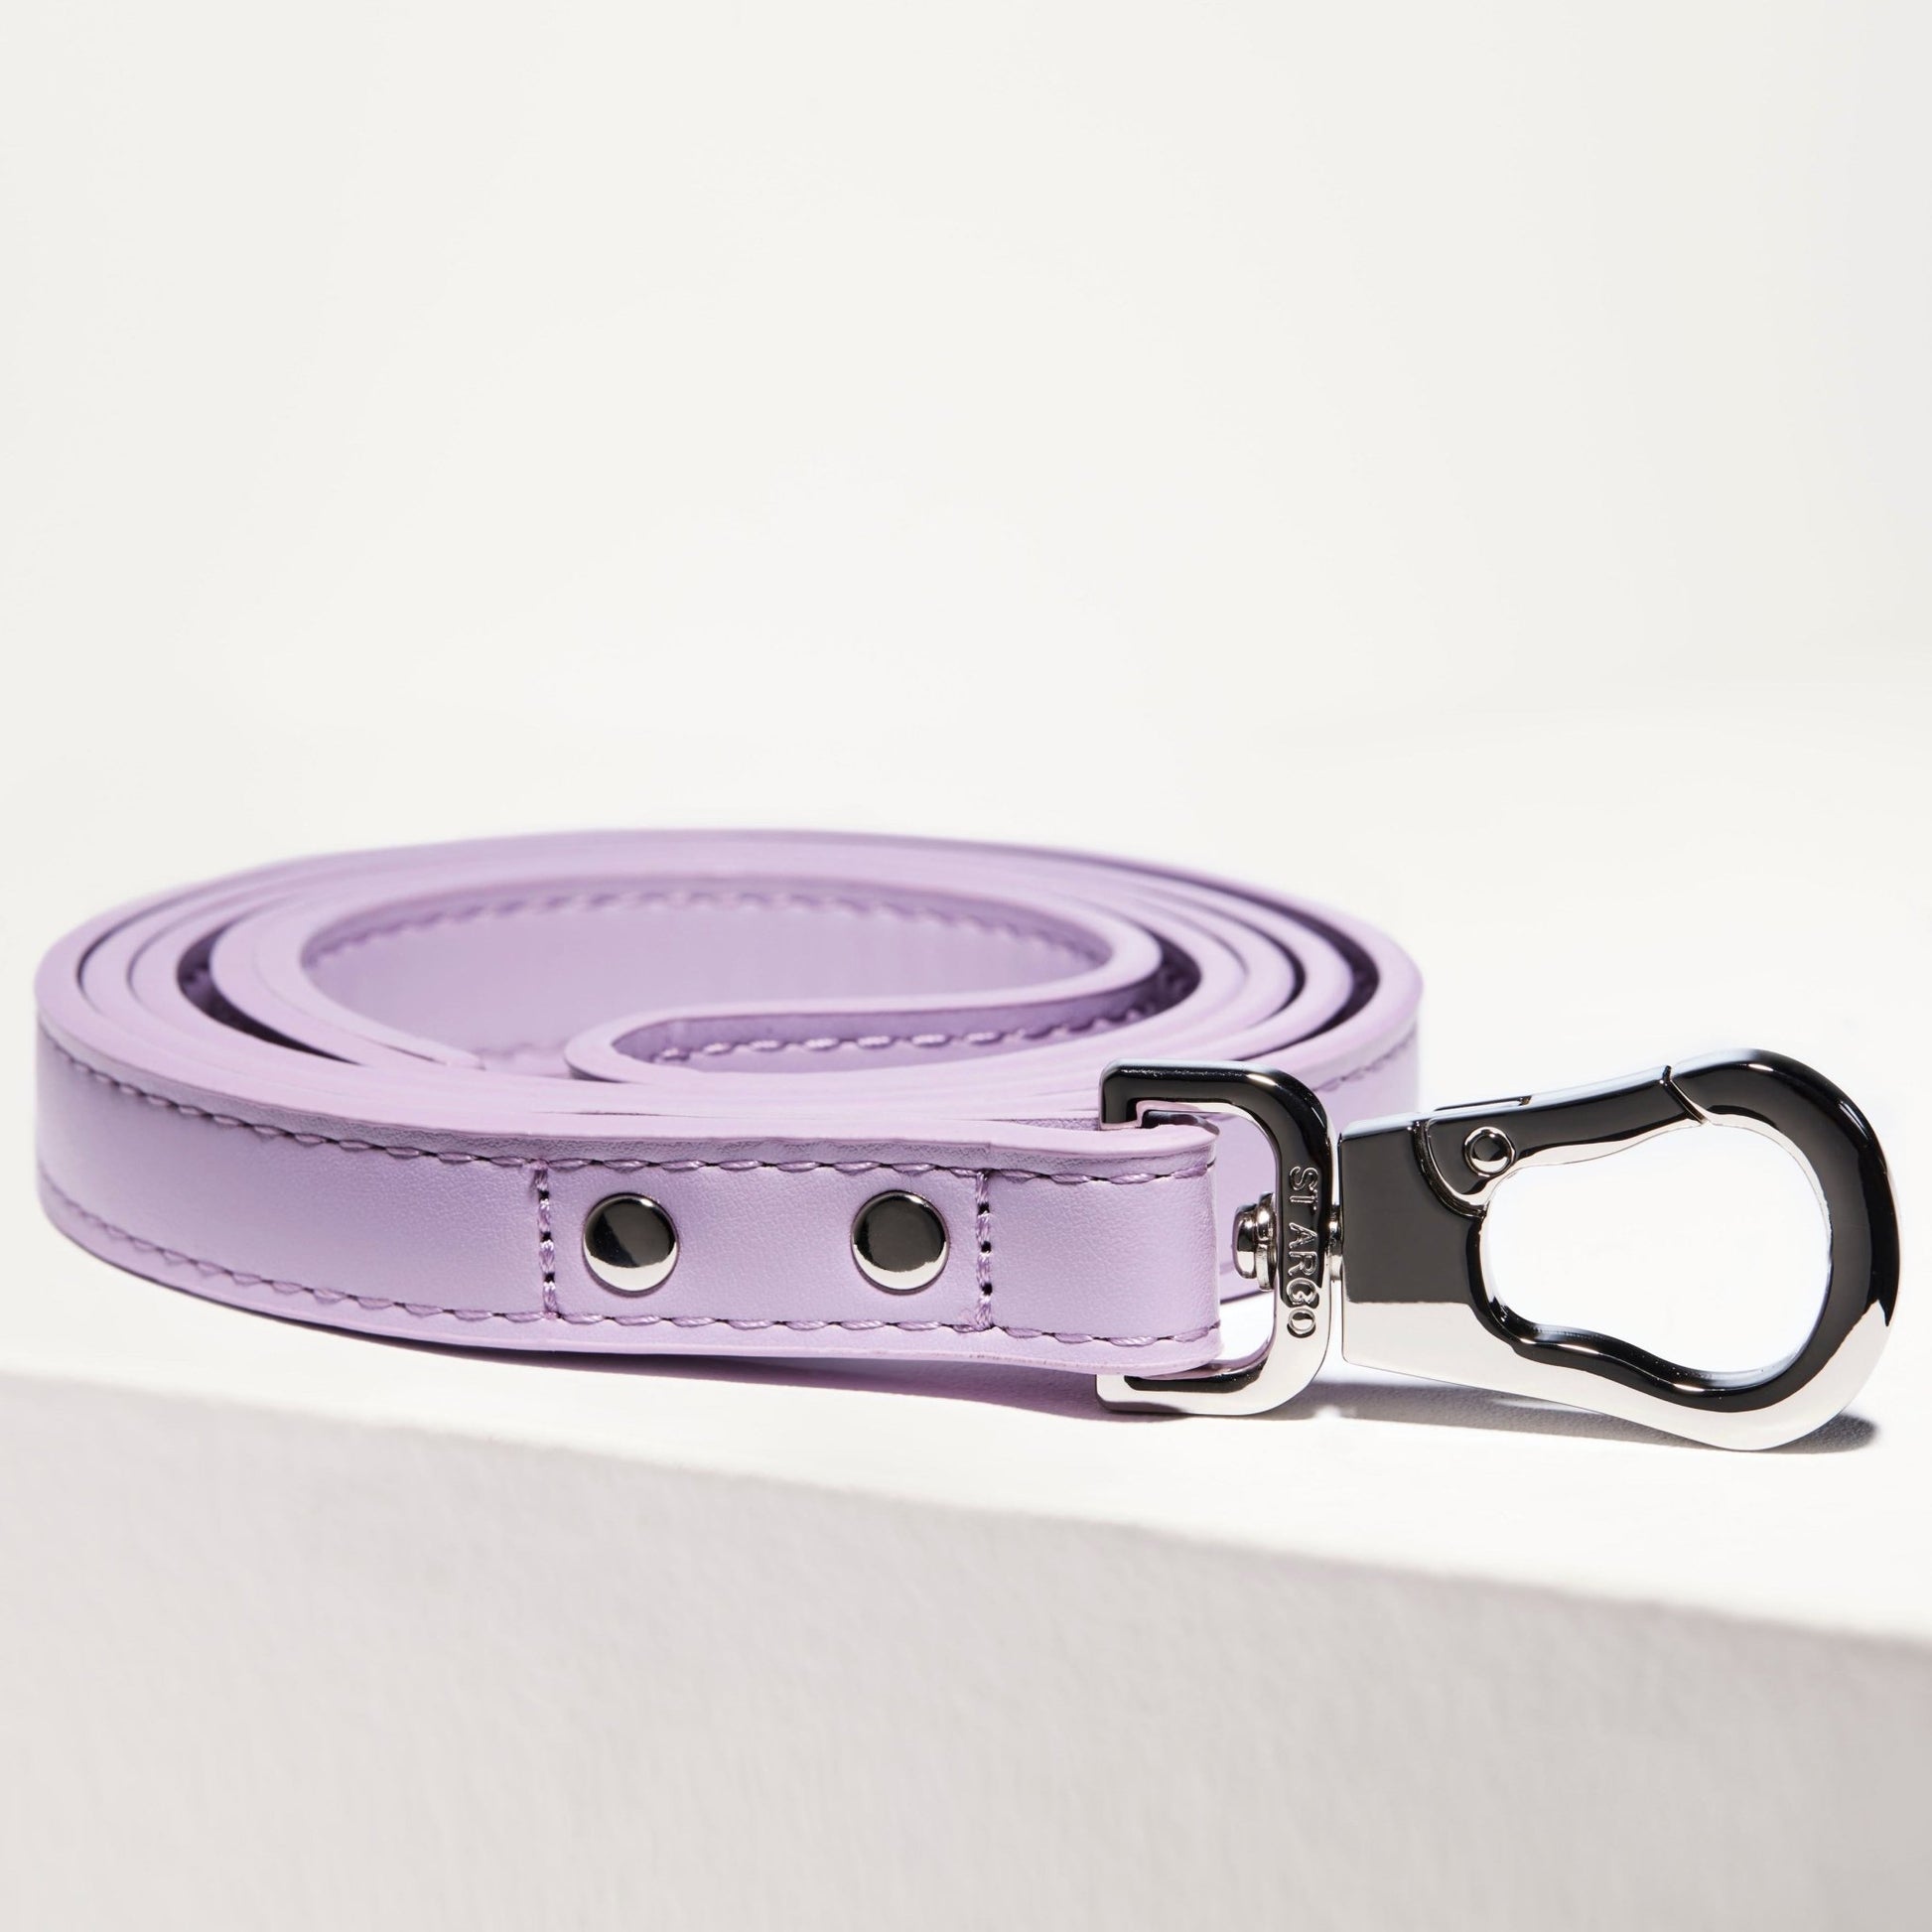 ST ARGO lilac purple pastel vegan leather dog leash with silver lobster clasp